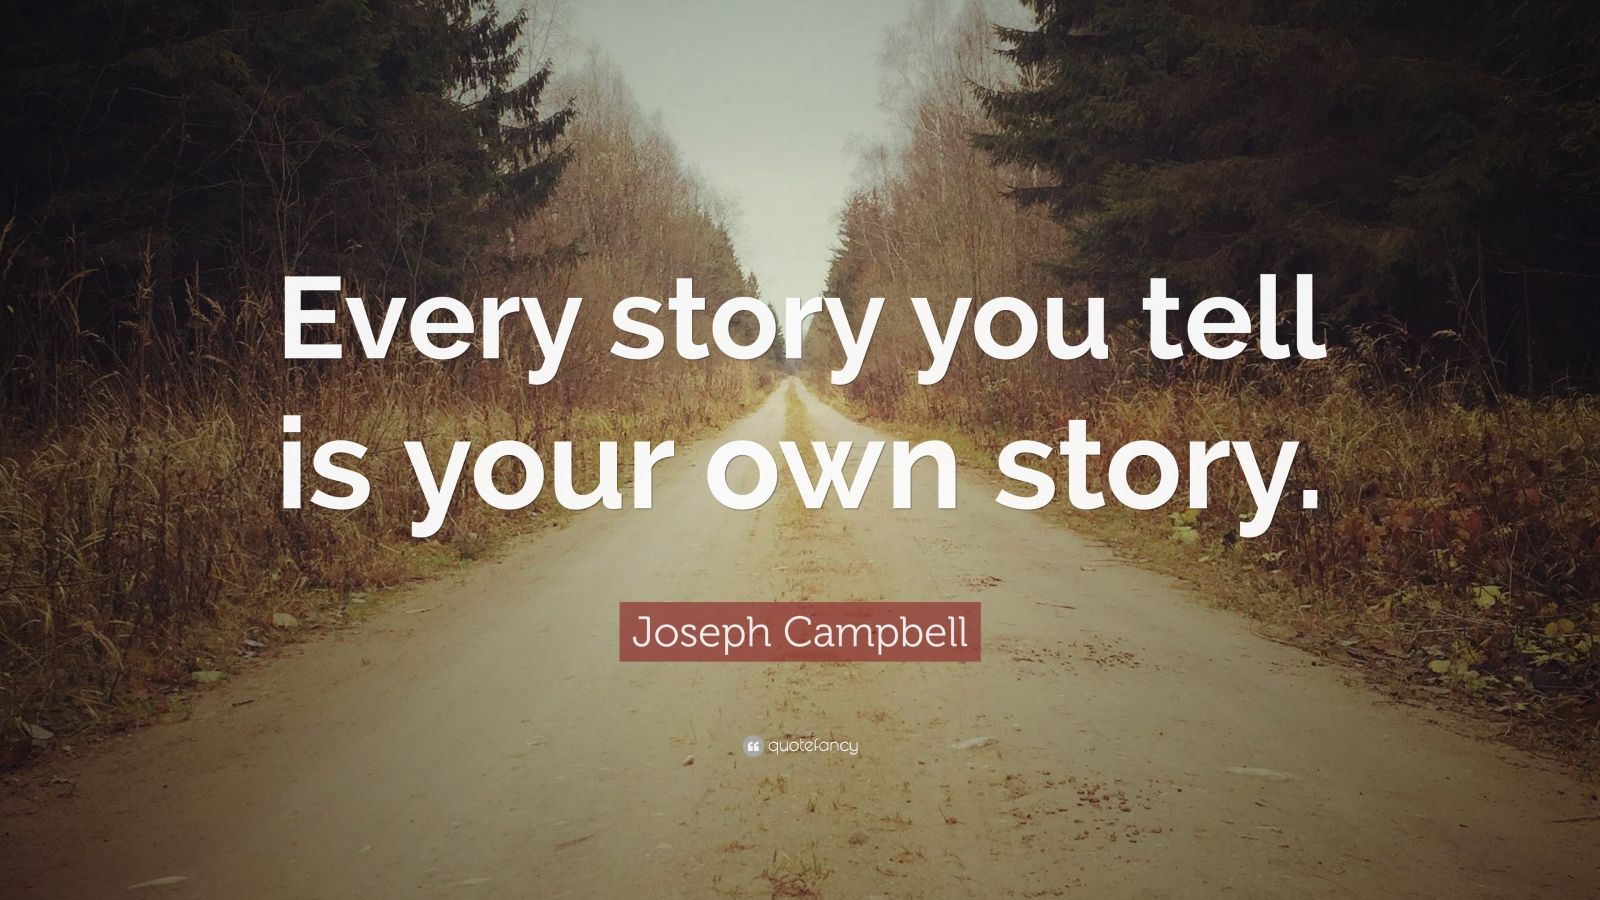 Joseph Campbell Quote: “Every Story You Tell Is Your Own Story.” (12